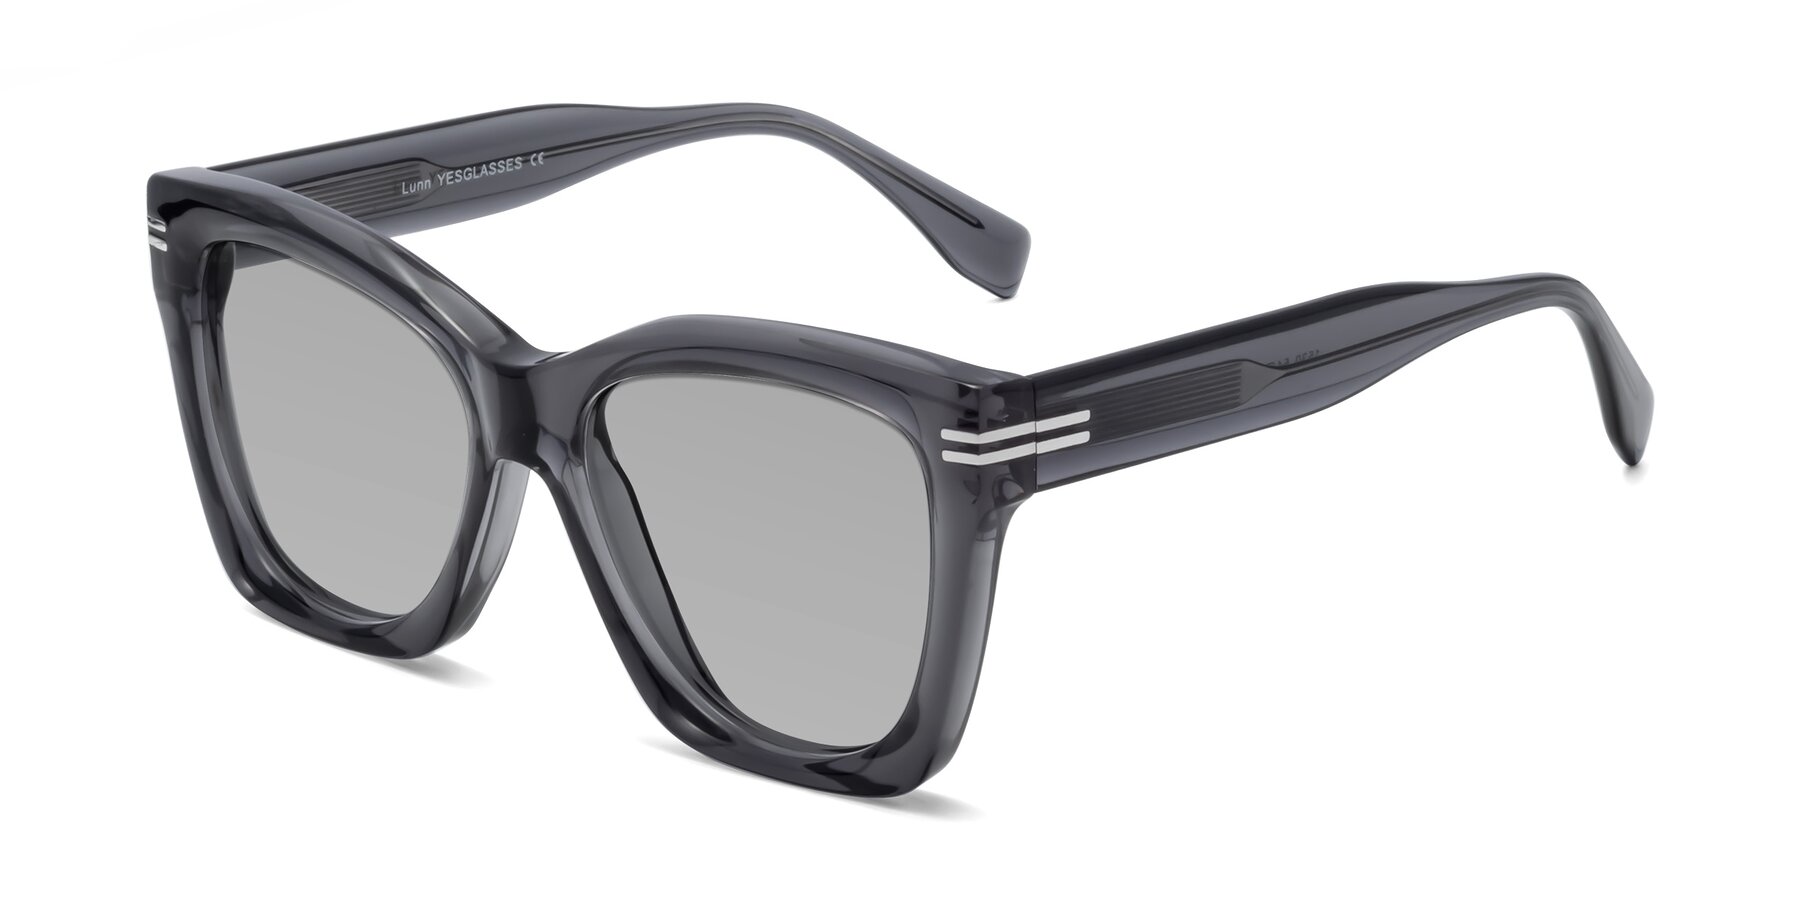 Angle of Lunn in Translucent Gray with Light Gray Tinted Lenses